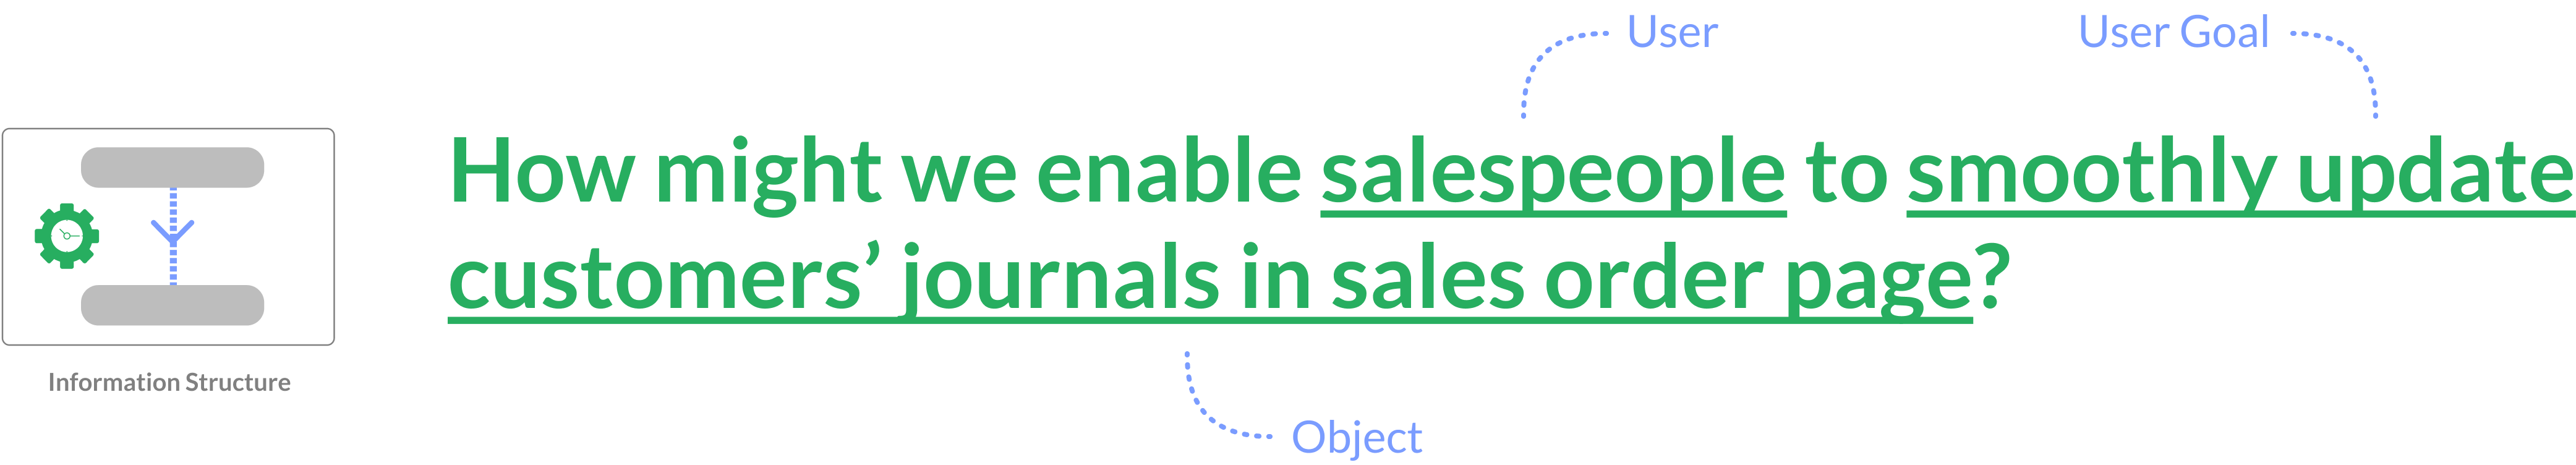 How might we enable salespeople to smoothly update customers’ journals in Sales order page?